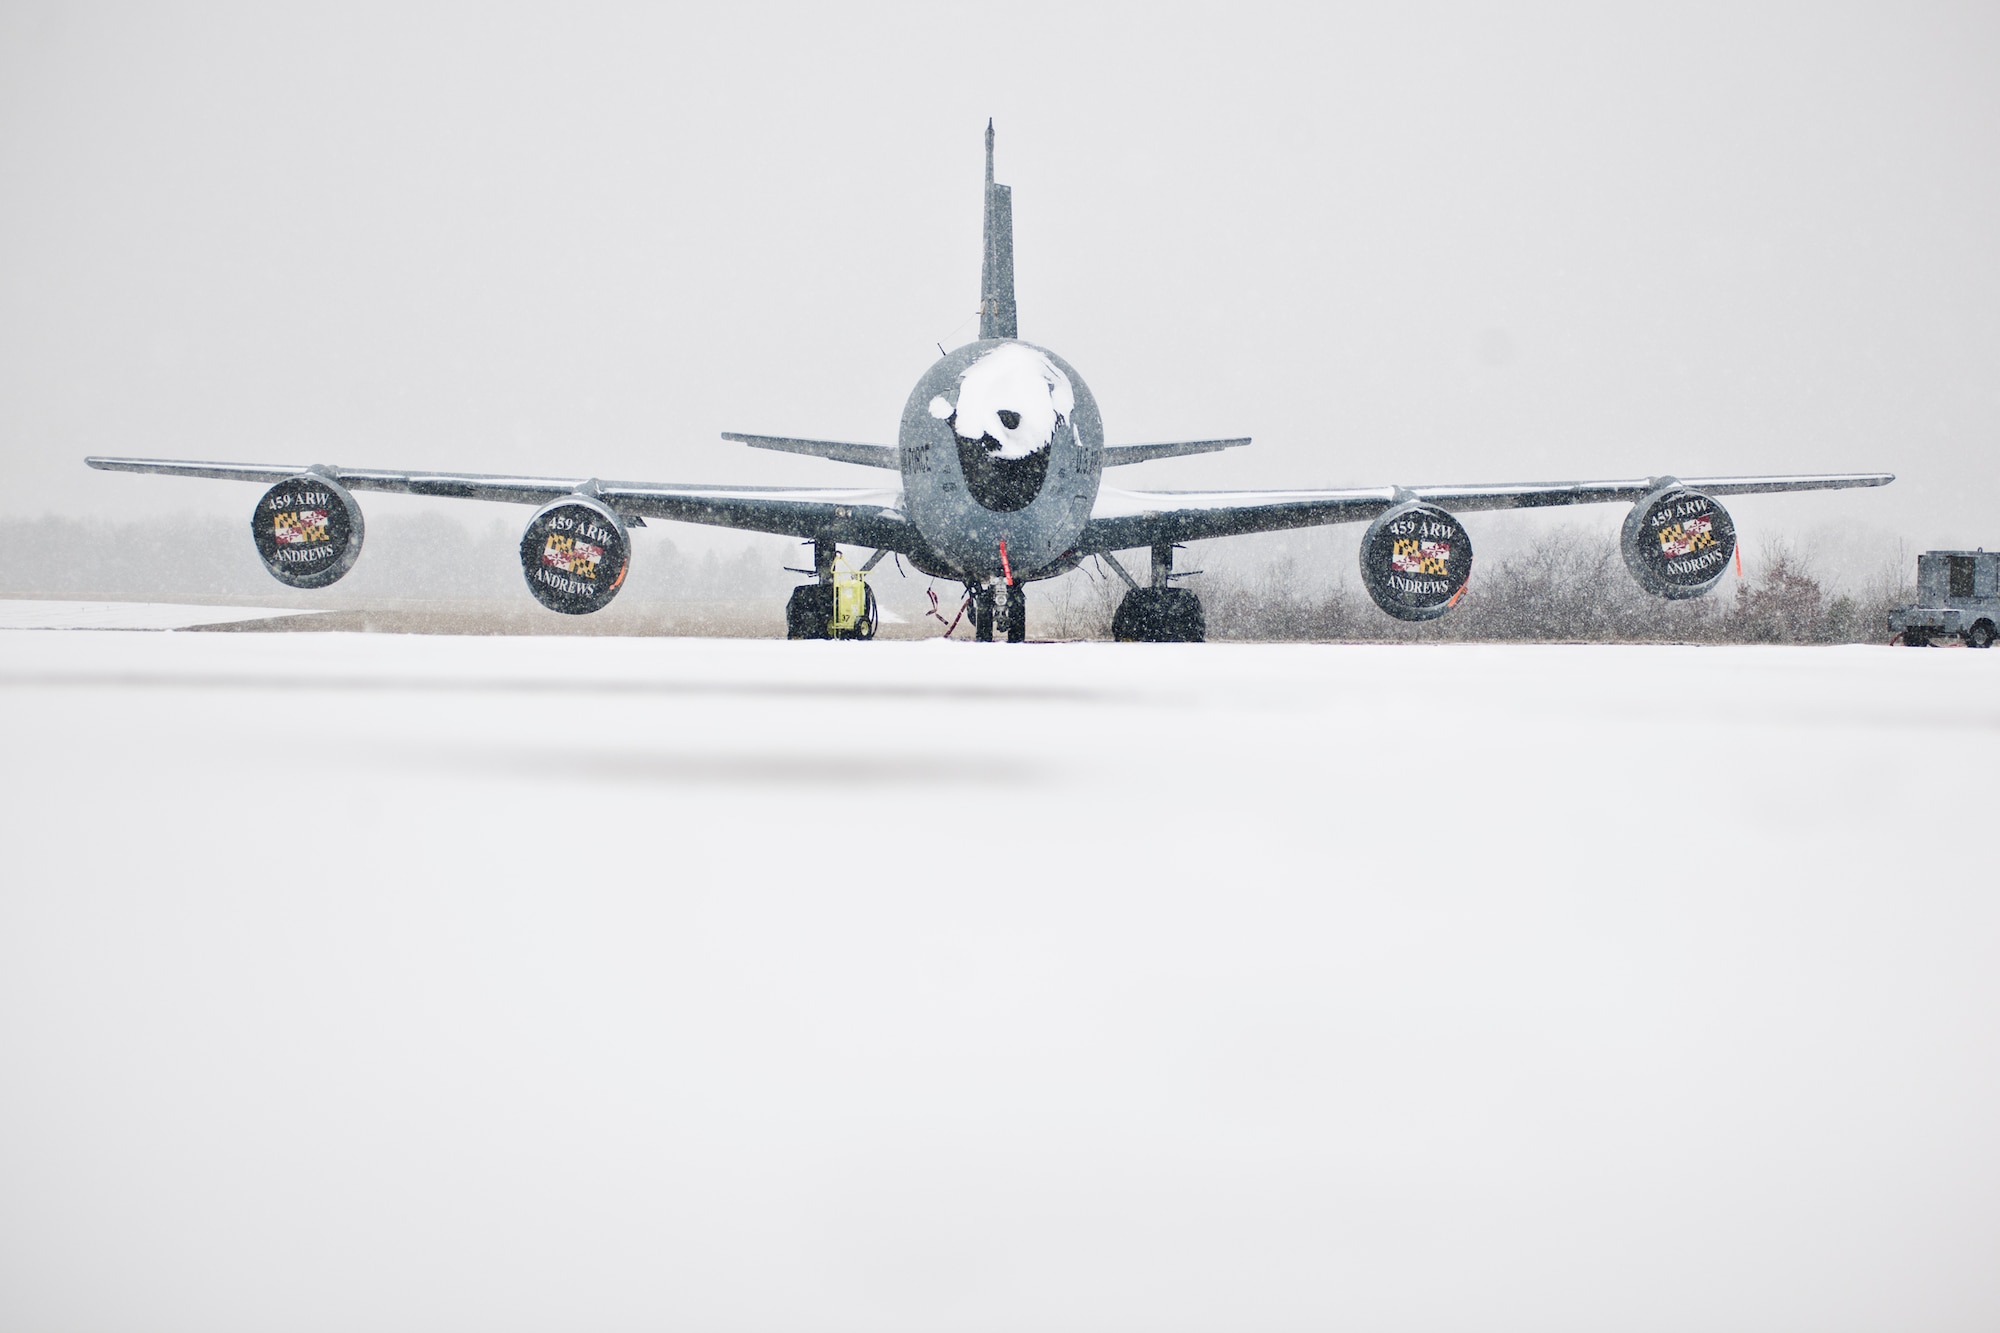 A KC-135R Stratotanker with the 459th Air Refueling Wing rests on the Joint Base Andrews, Maryland, flight line during the region's first winter storm of the season Jan. 8, 2017. Up to two inches fell in parts of the National Capital Region during the 459th's drill weekend. (U.S. Air Force photo/Tech. Sgt. Kat Justen)